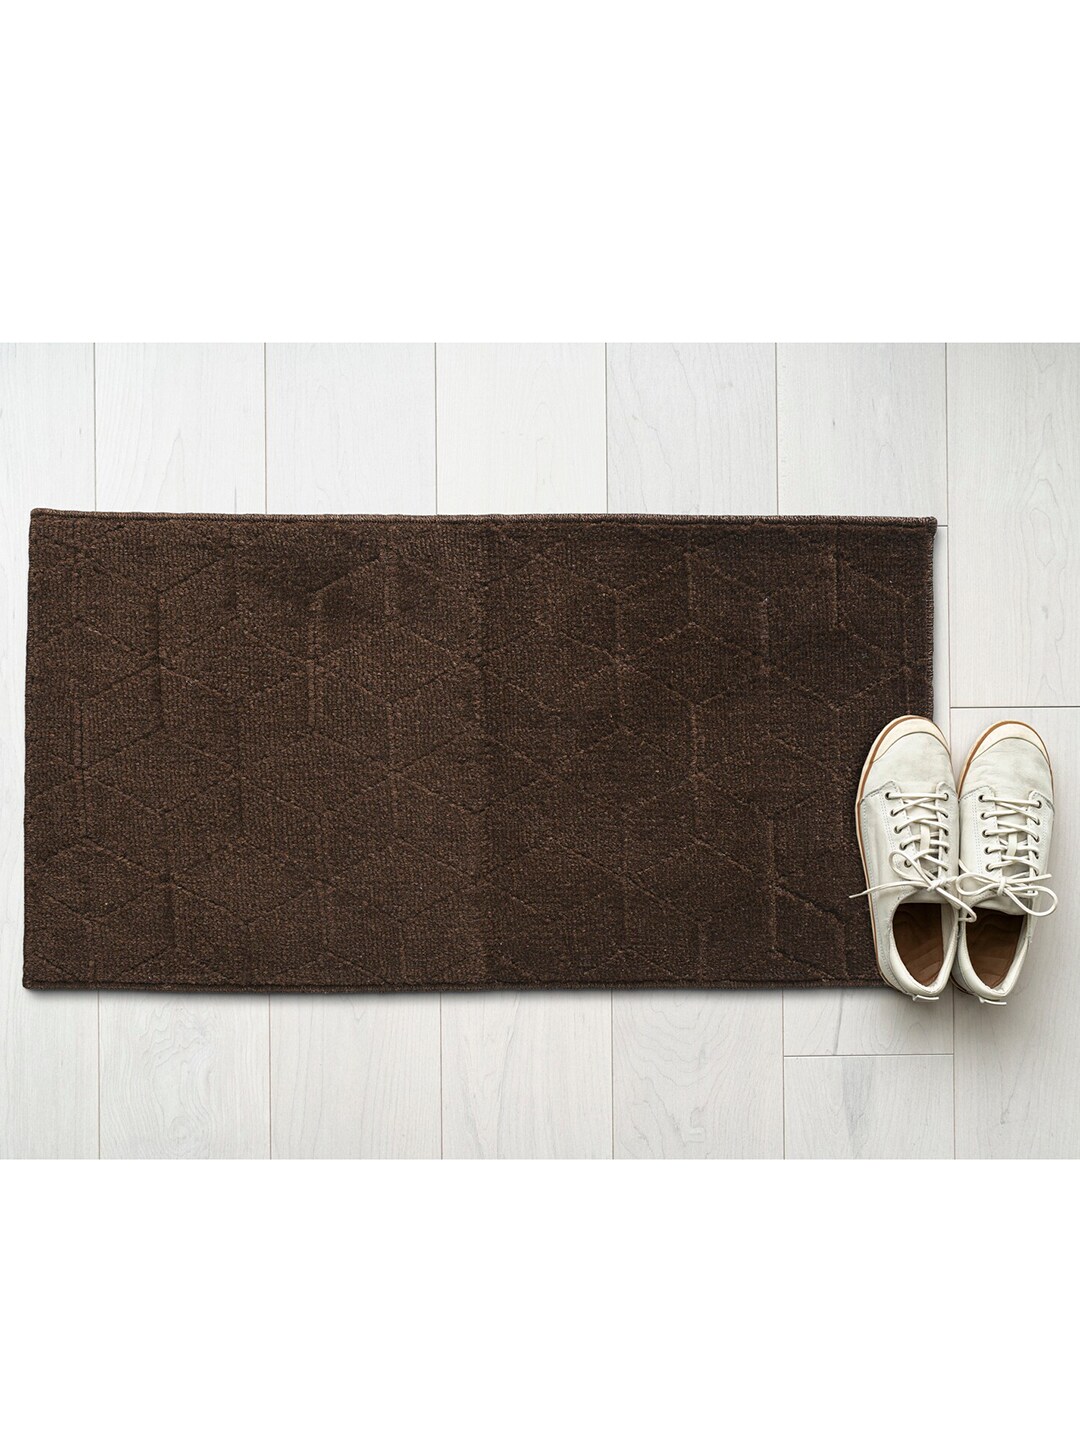 Saral Home Brown Solid Anti-Skid Cotton Doormat Price in India